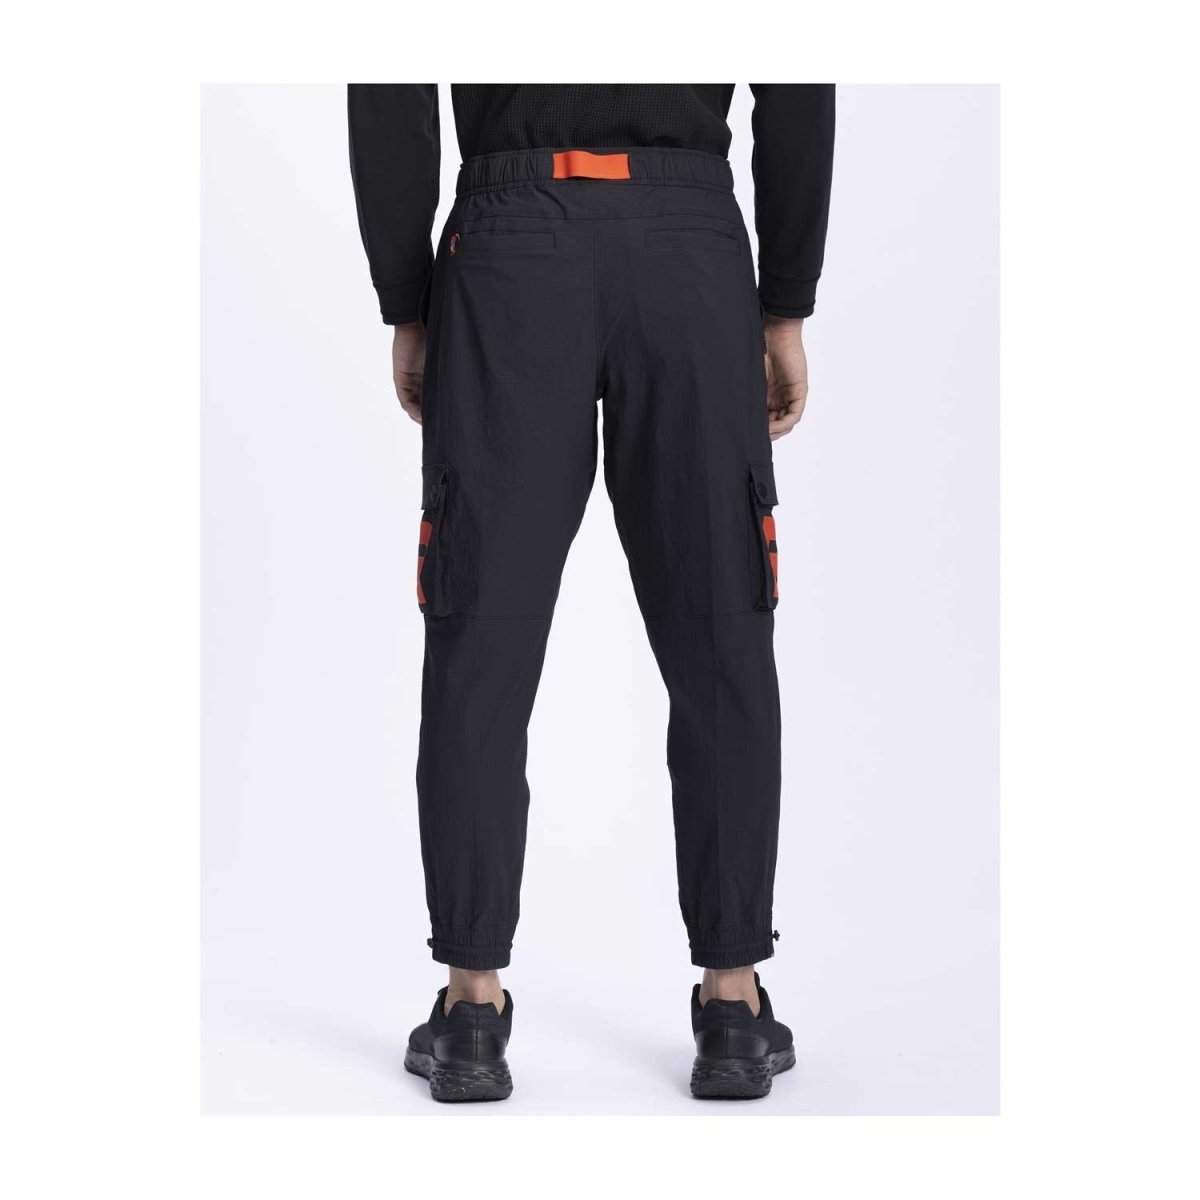 Team Rocket HQ Collection Black Relaxed Fit Utility Jogger Pants - Adult